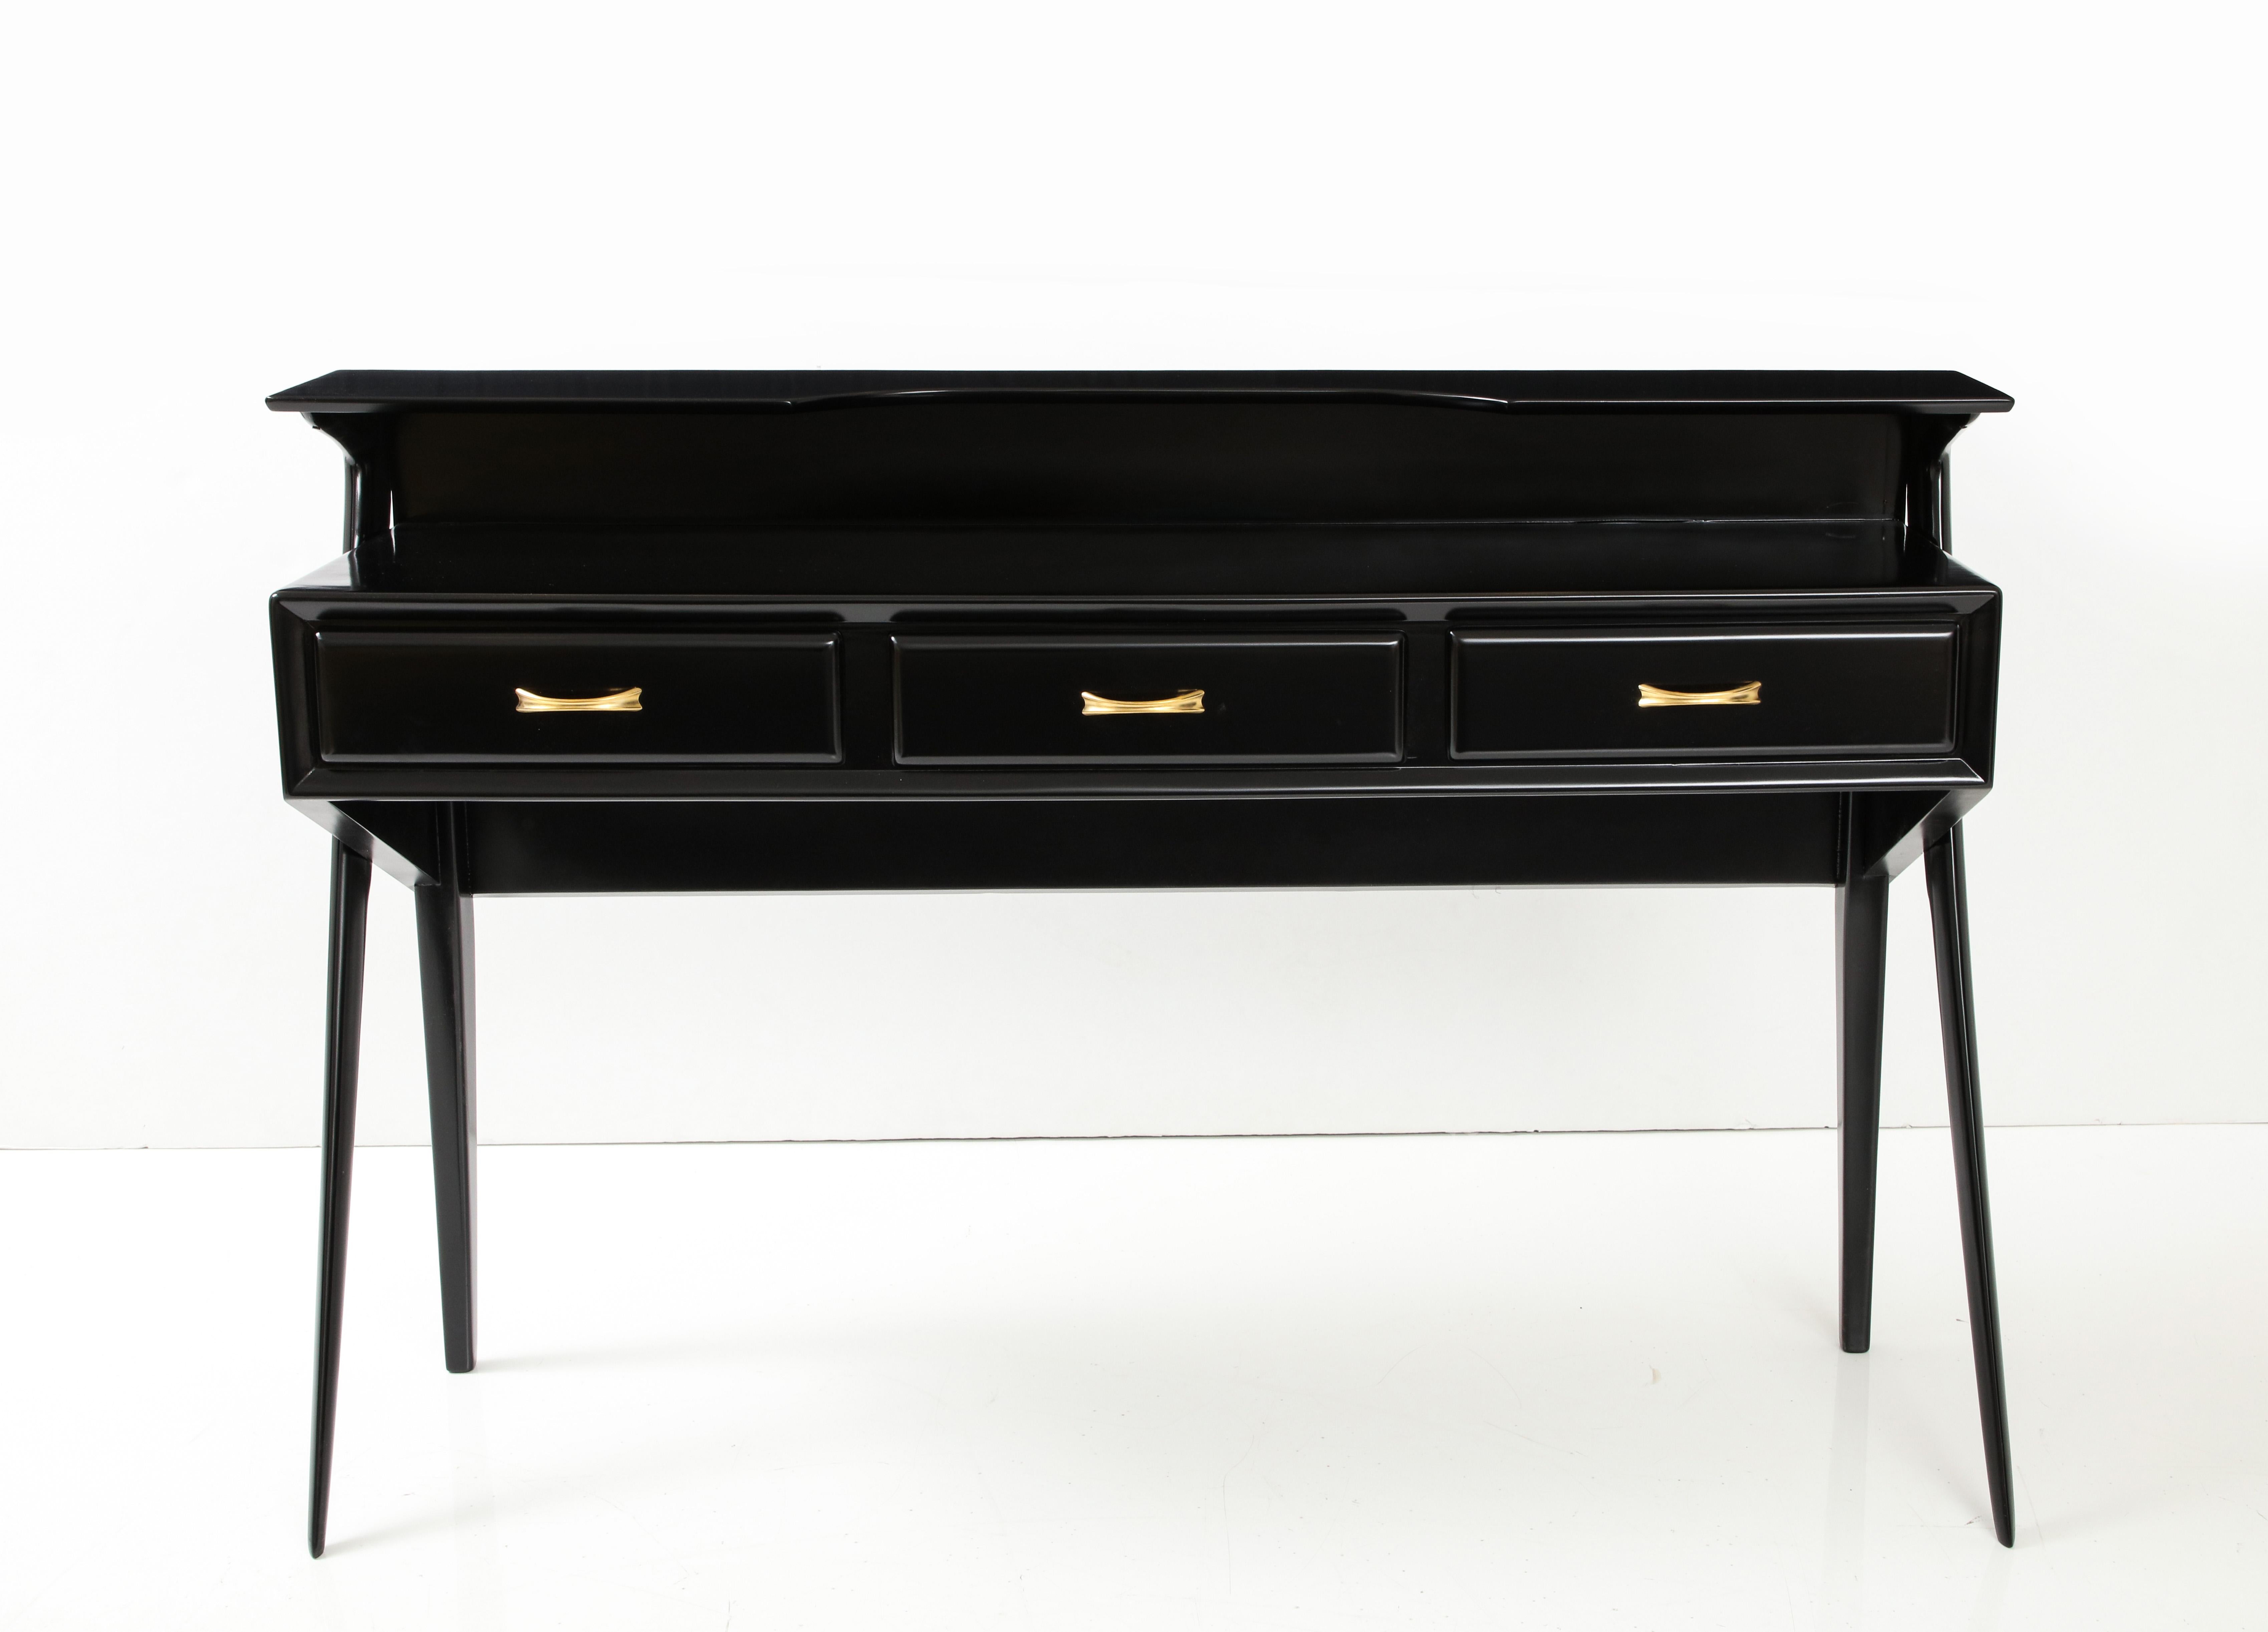 Mid-20th Century Mid-Century Modern Italian Sculptural Two-Tier Console In Black Lacquer For Sale